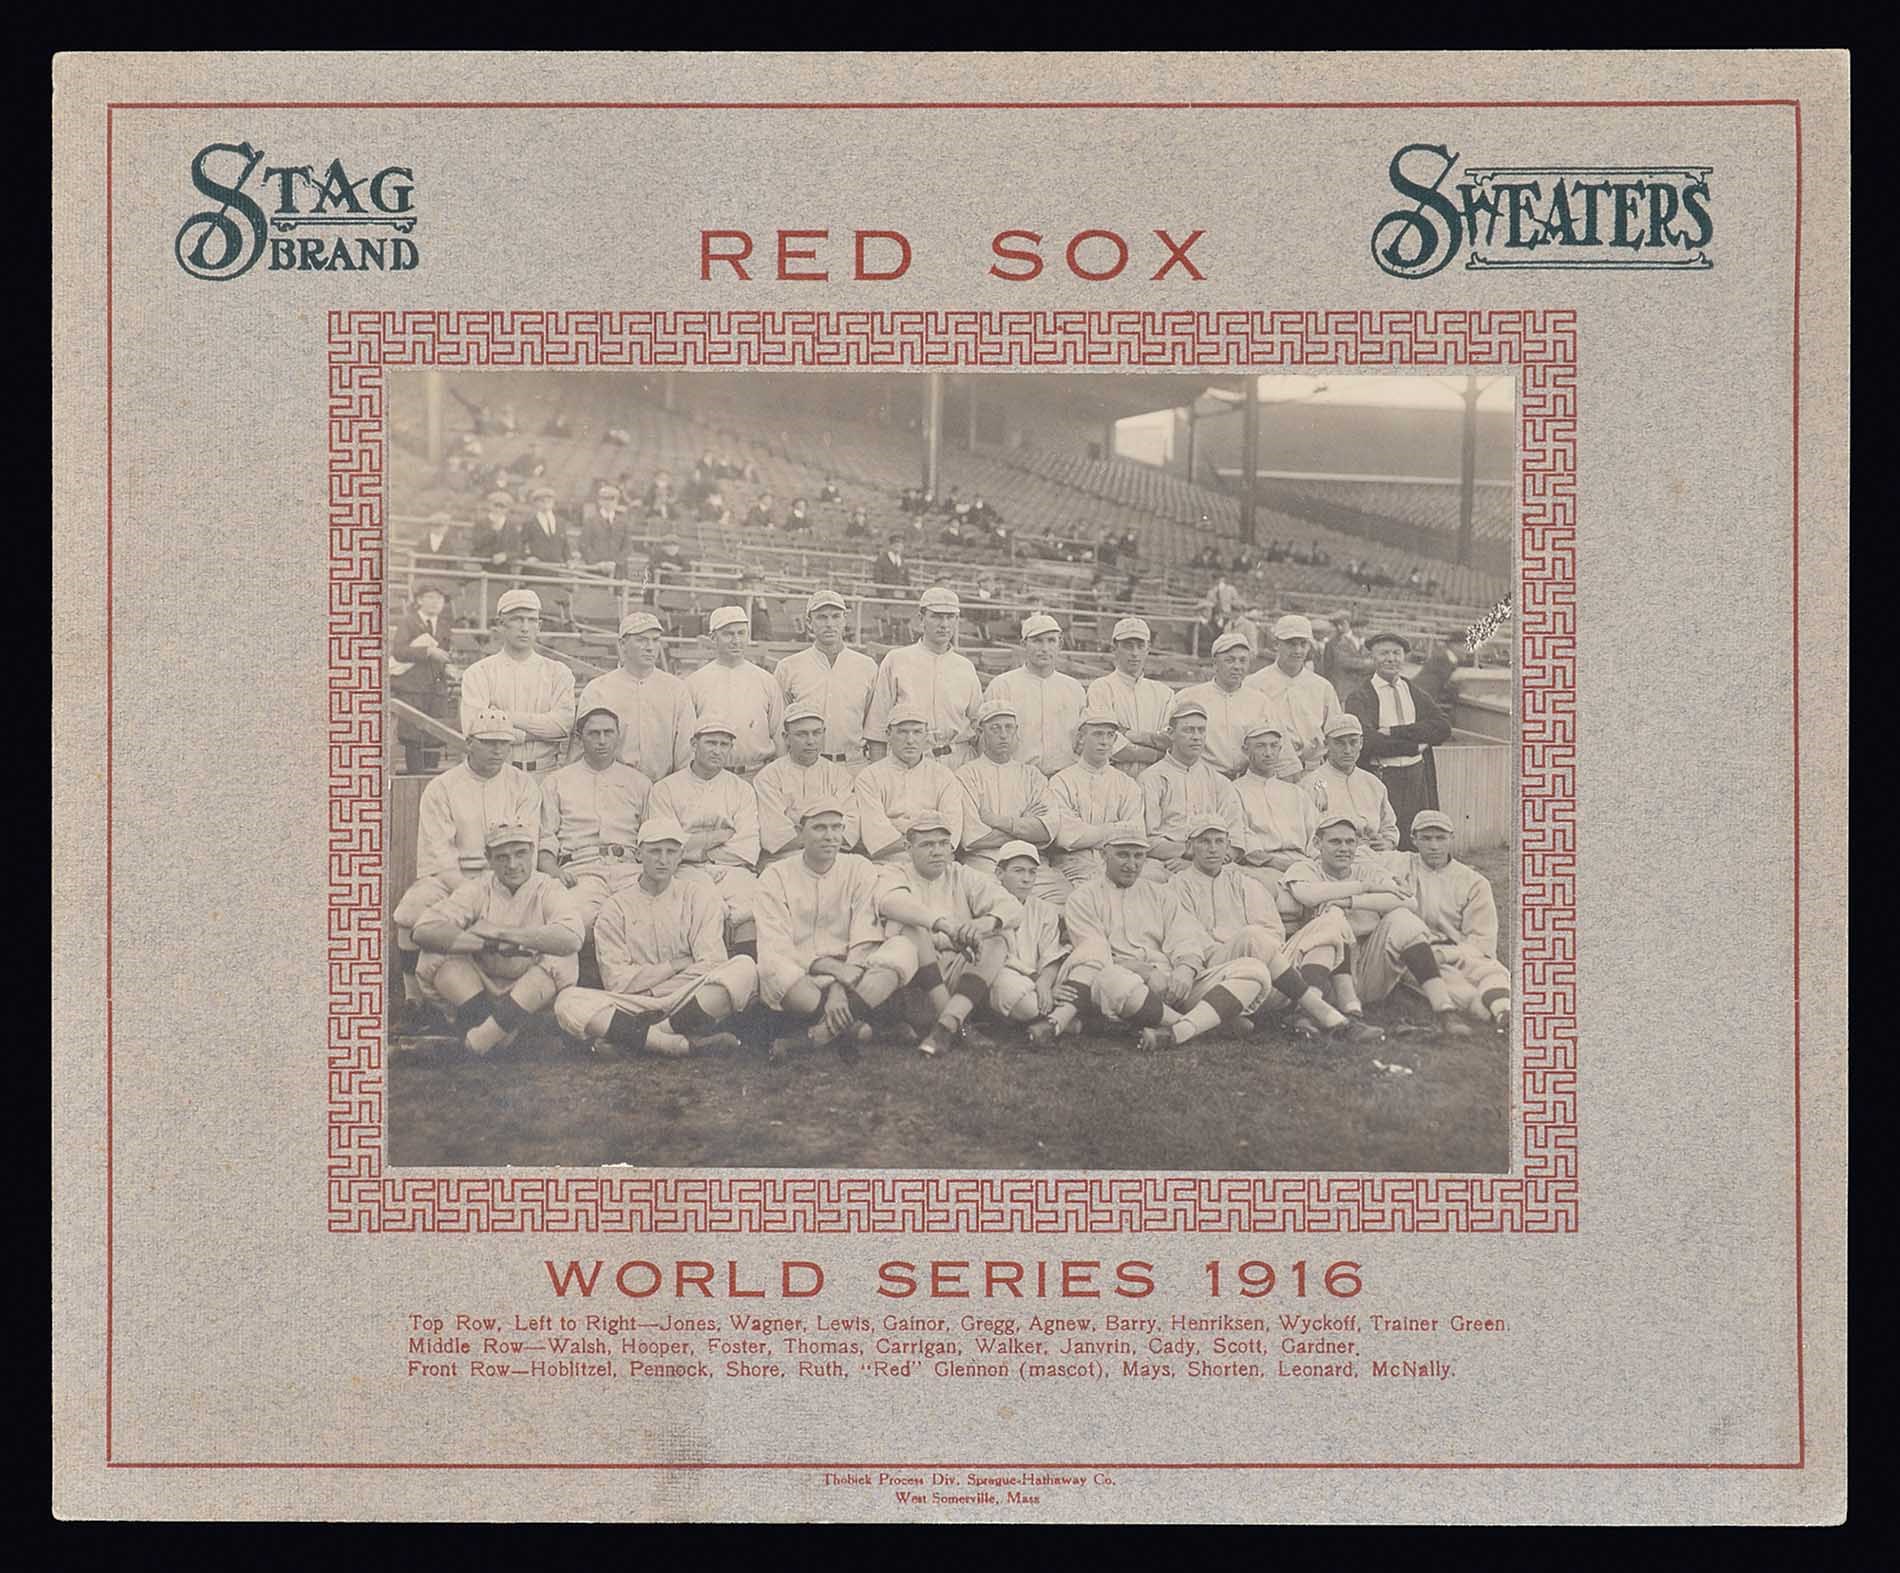 CAB 1916 Boston Red Sox Stag Brand Sweaters.jpg